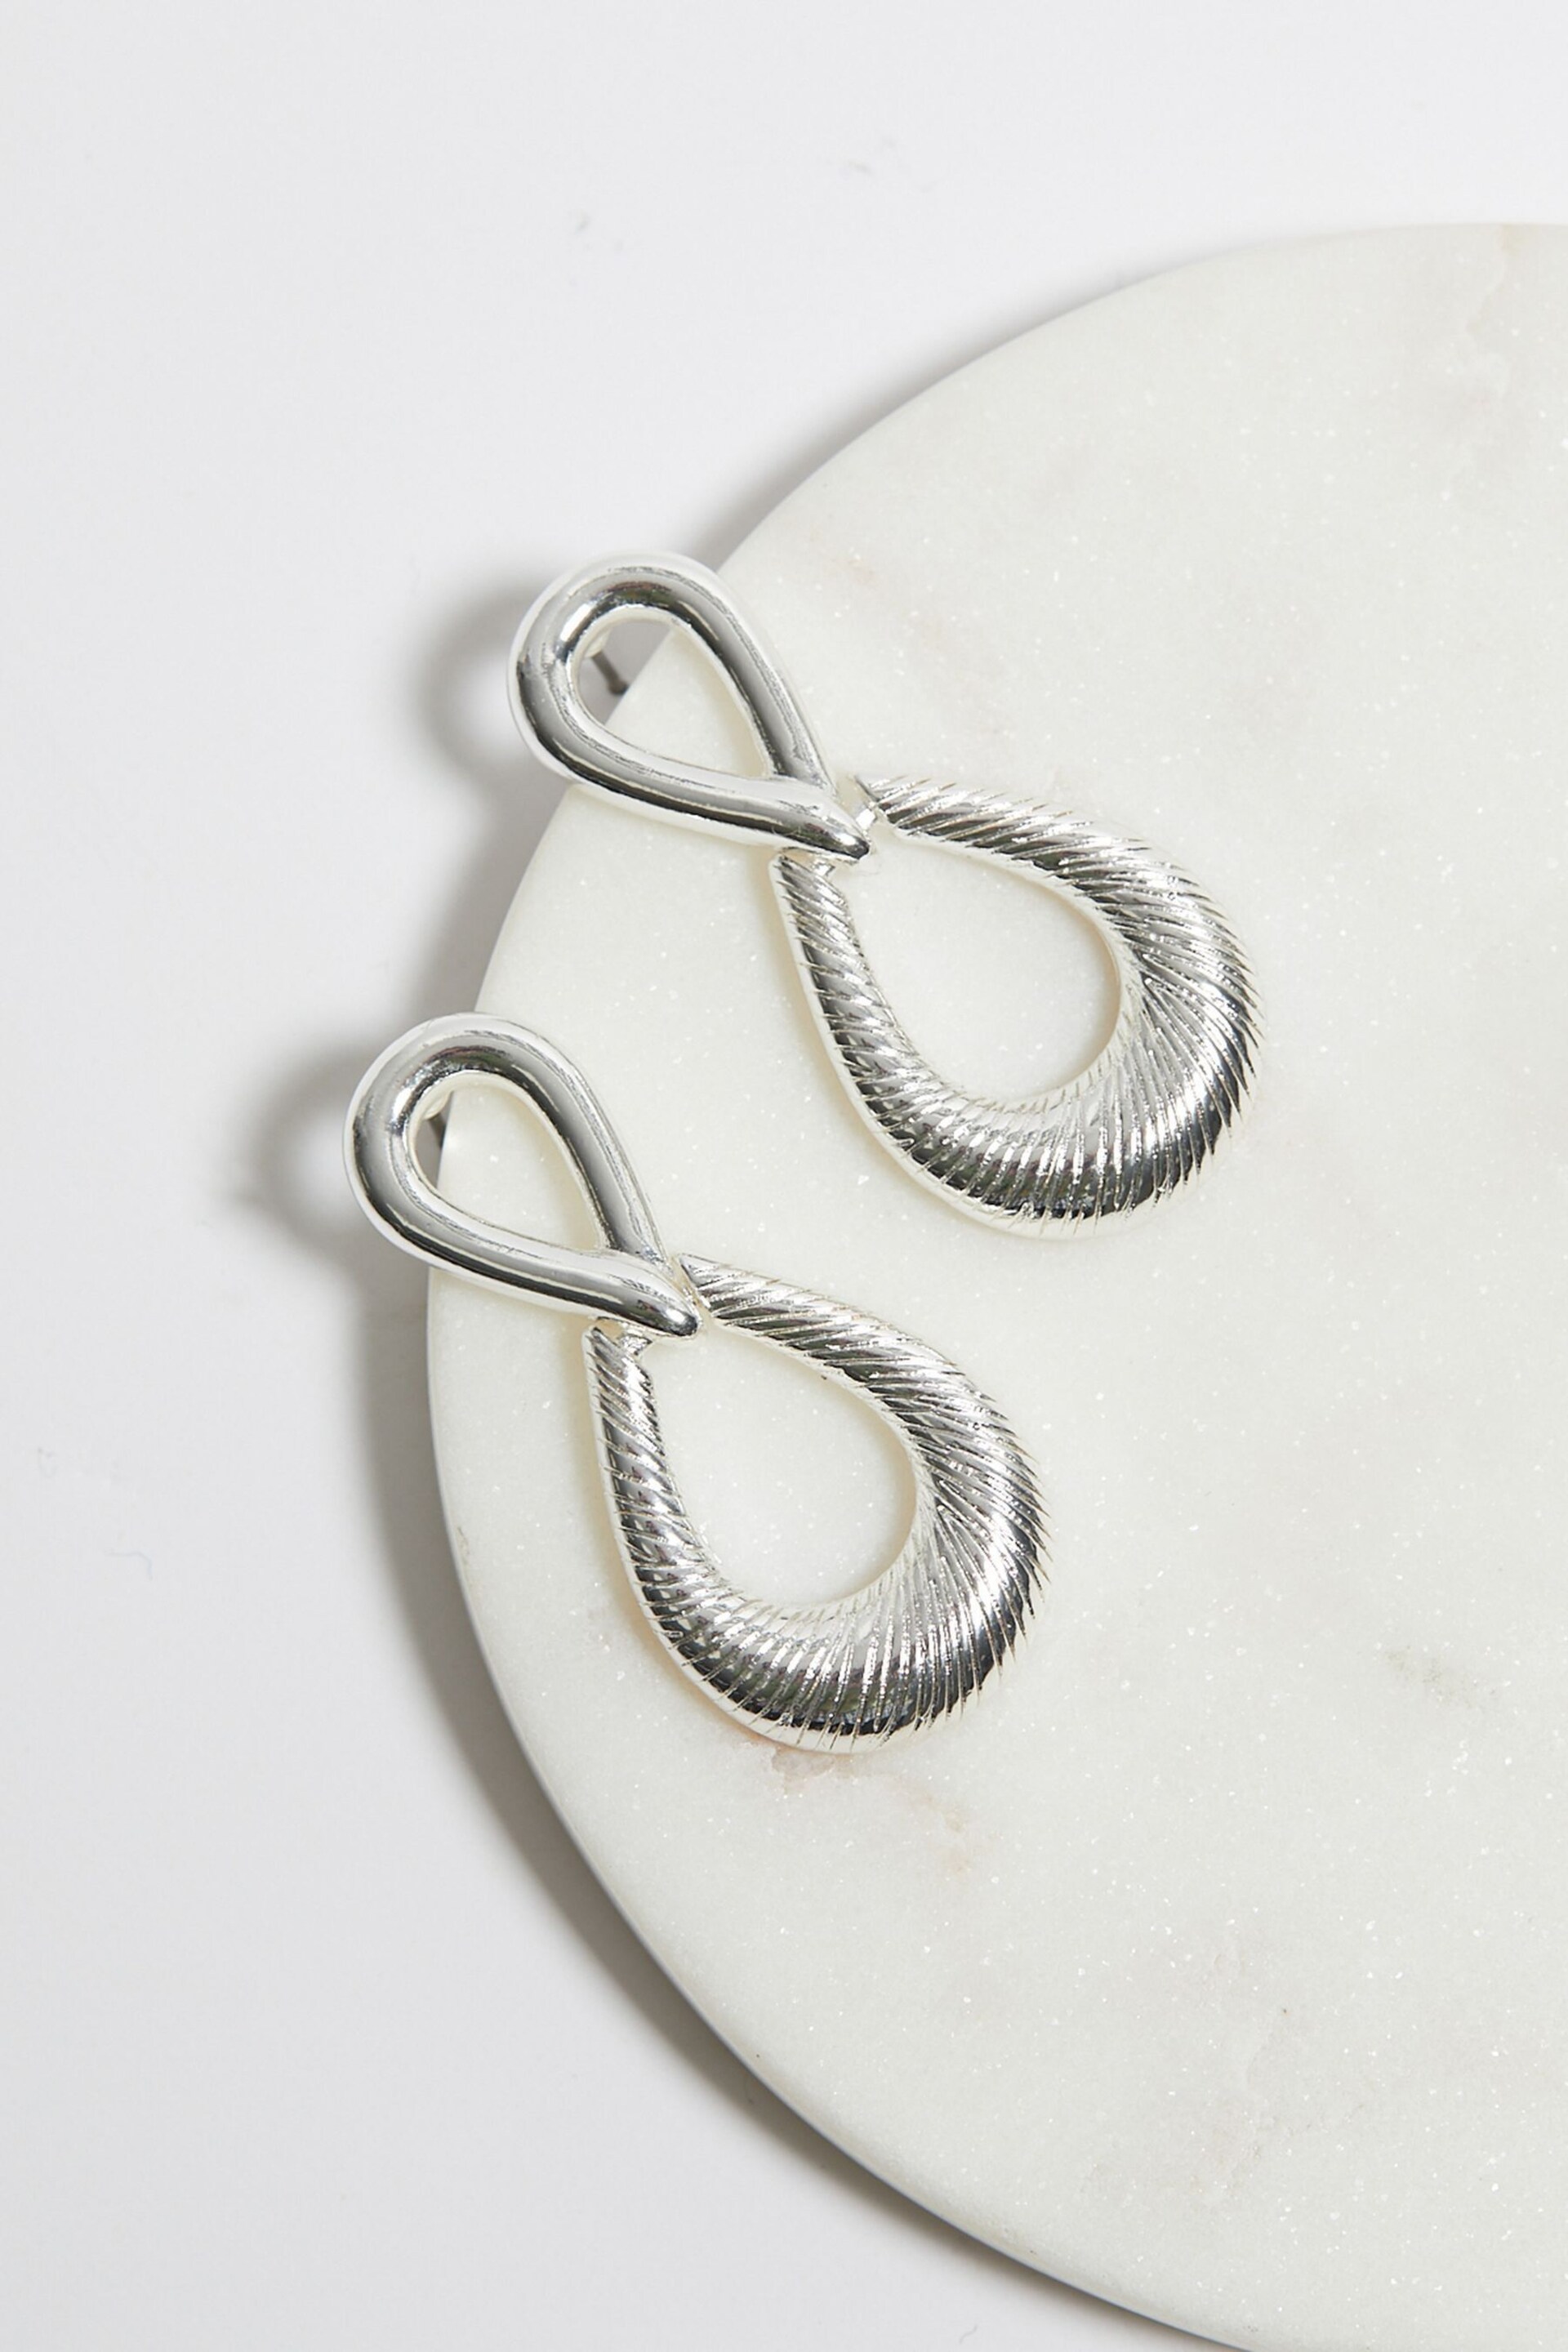 Mood Silver Recycled Polished And Textured Tear Drop Earrings - Image 2 of 2